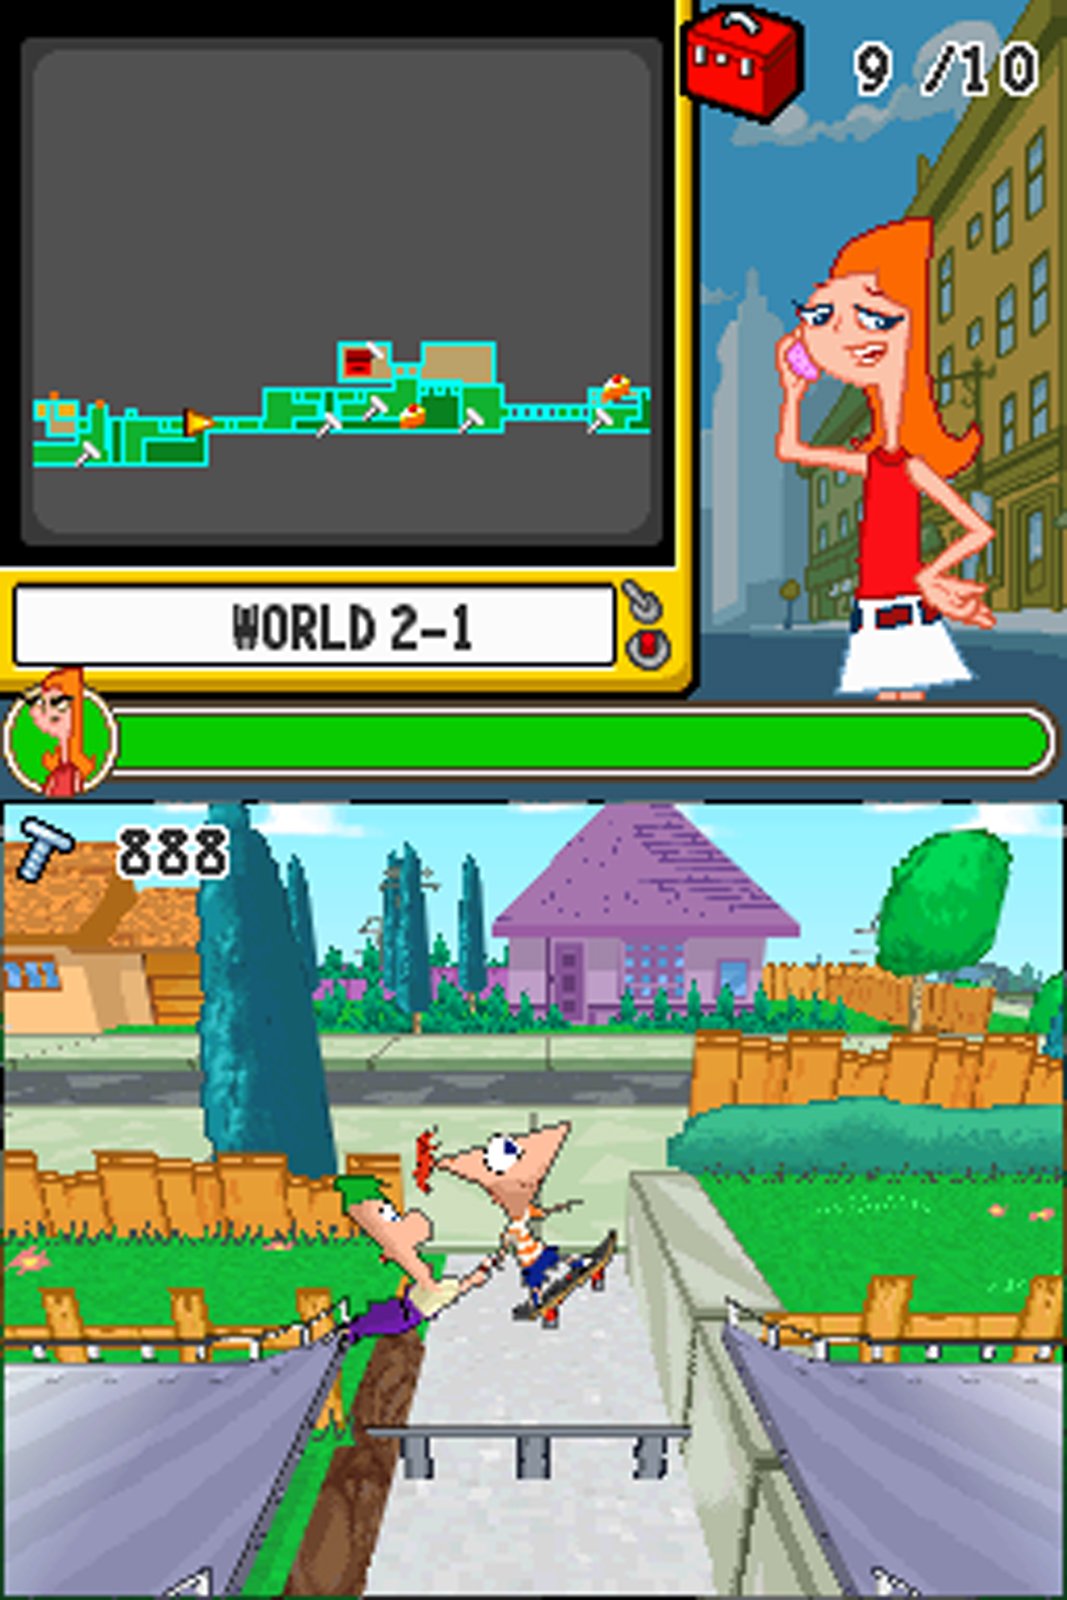 Phineas and Ferb Ride Again - Nintendo DS